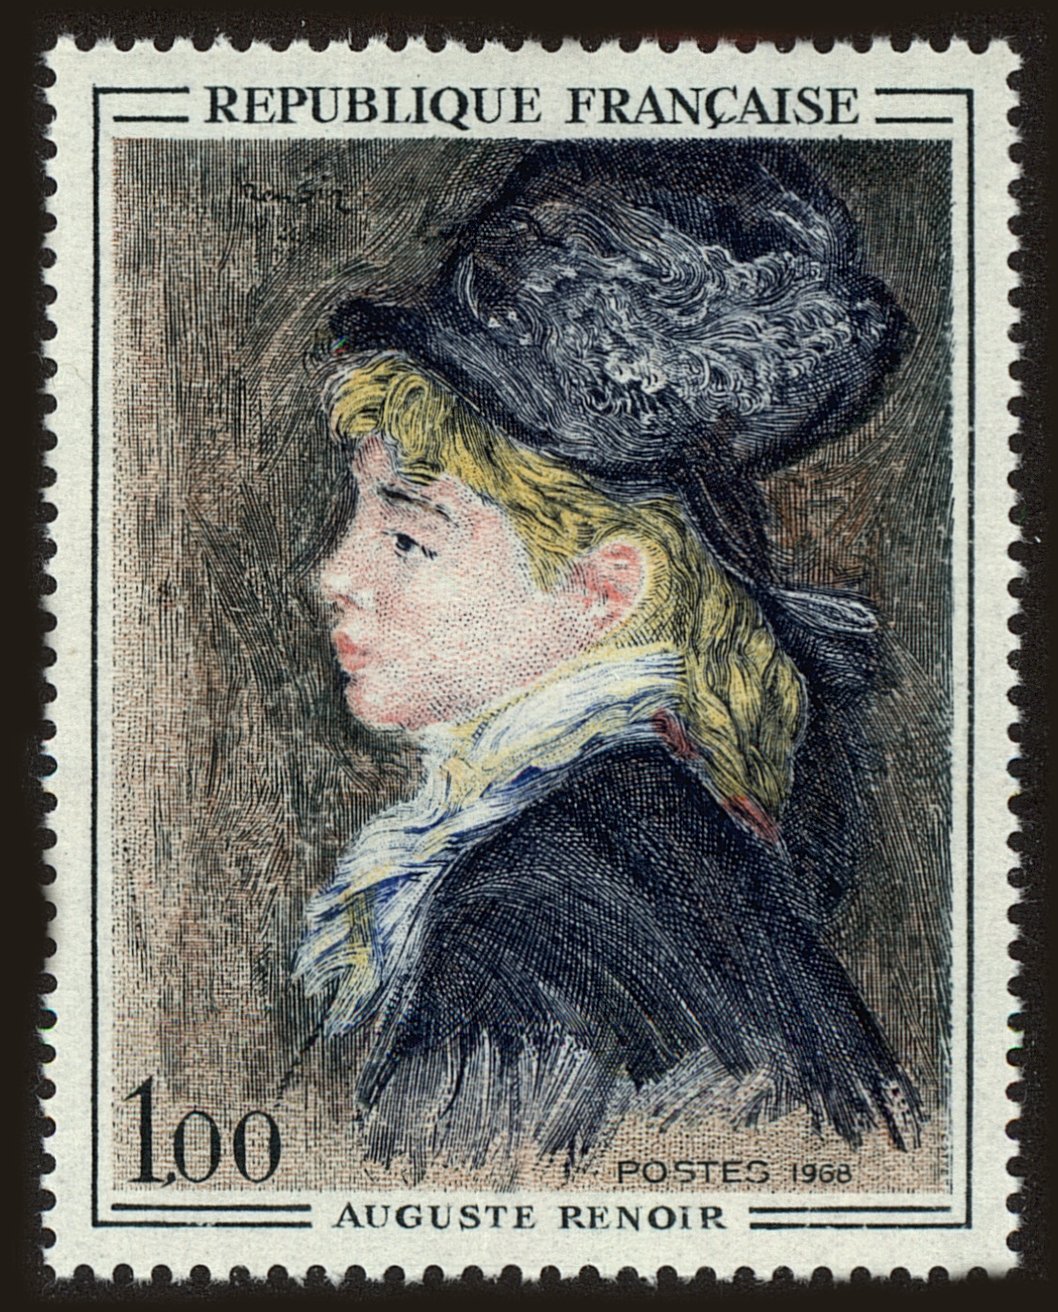 Front view of France 1207 collectors stamp